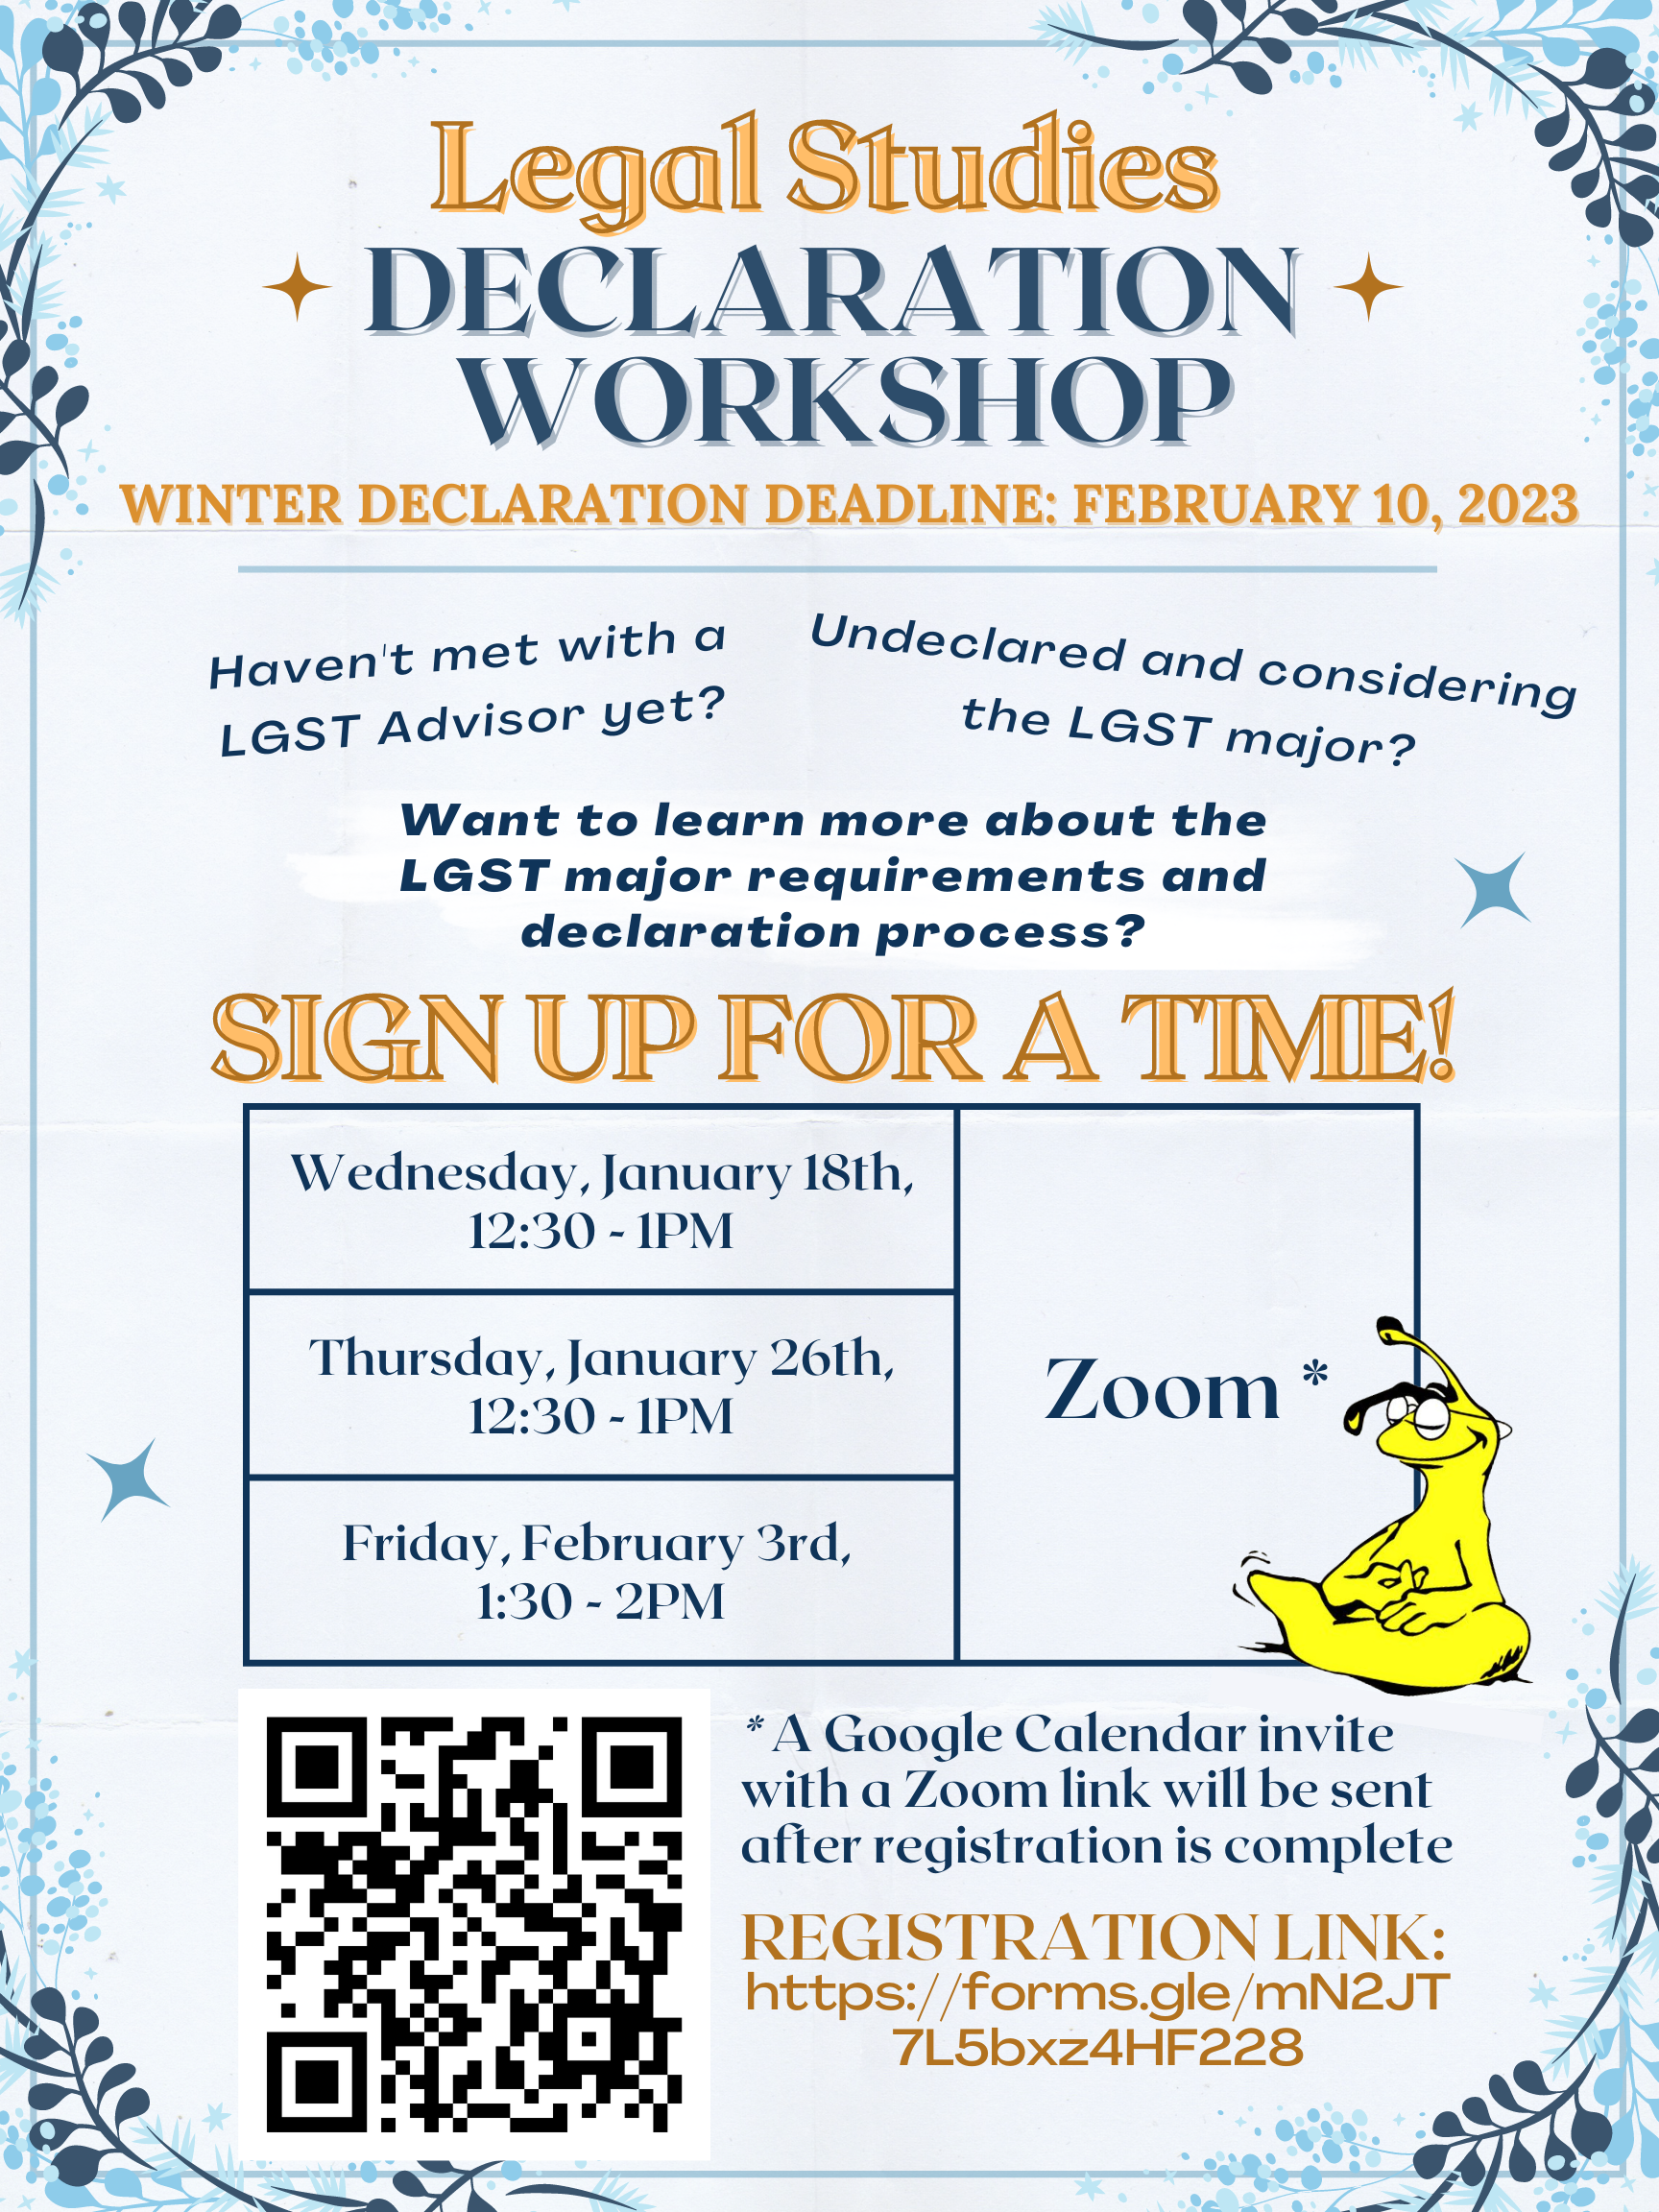 Flyer for the Legal Studies Declaration Workshops hosted in Winter Quarter. Flyer contains a QR code and link to register for the workshops on three separate dates. The link is https://forms.gle/R33RL8h3hcZAynRk8.